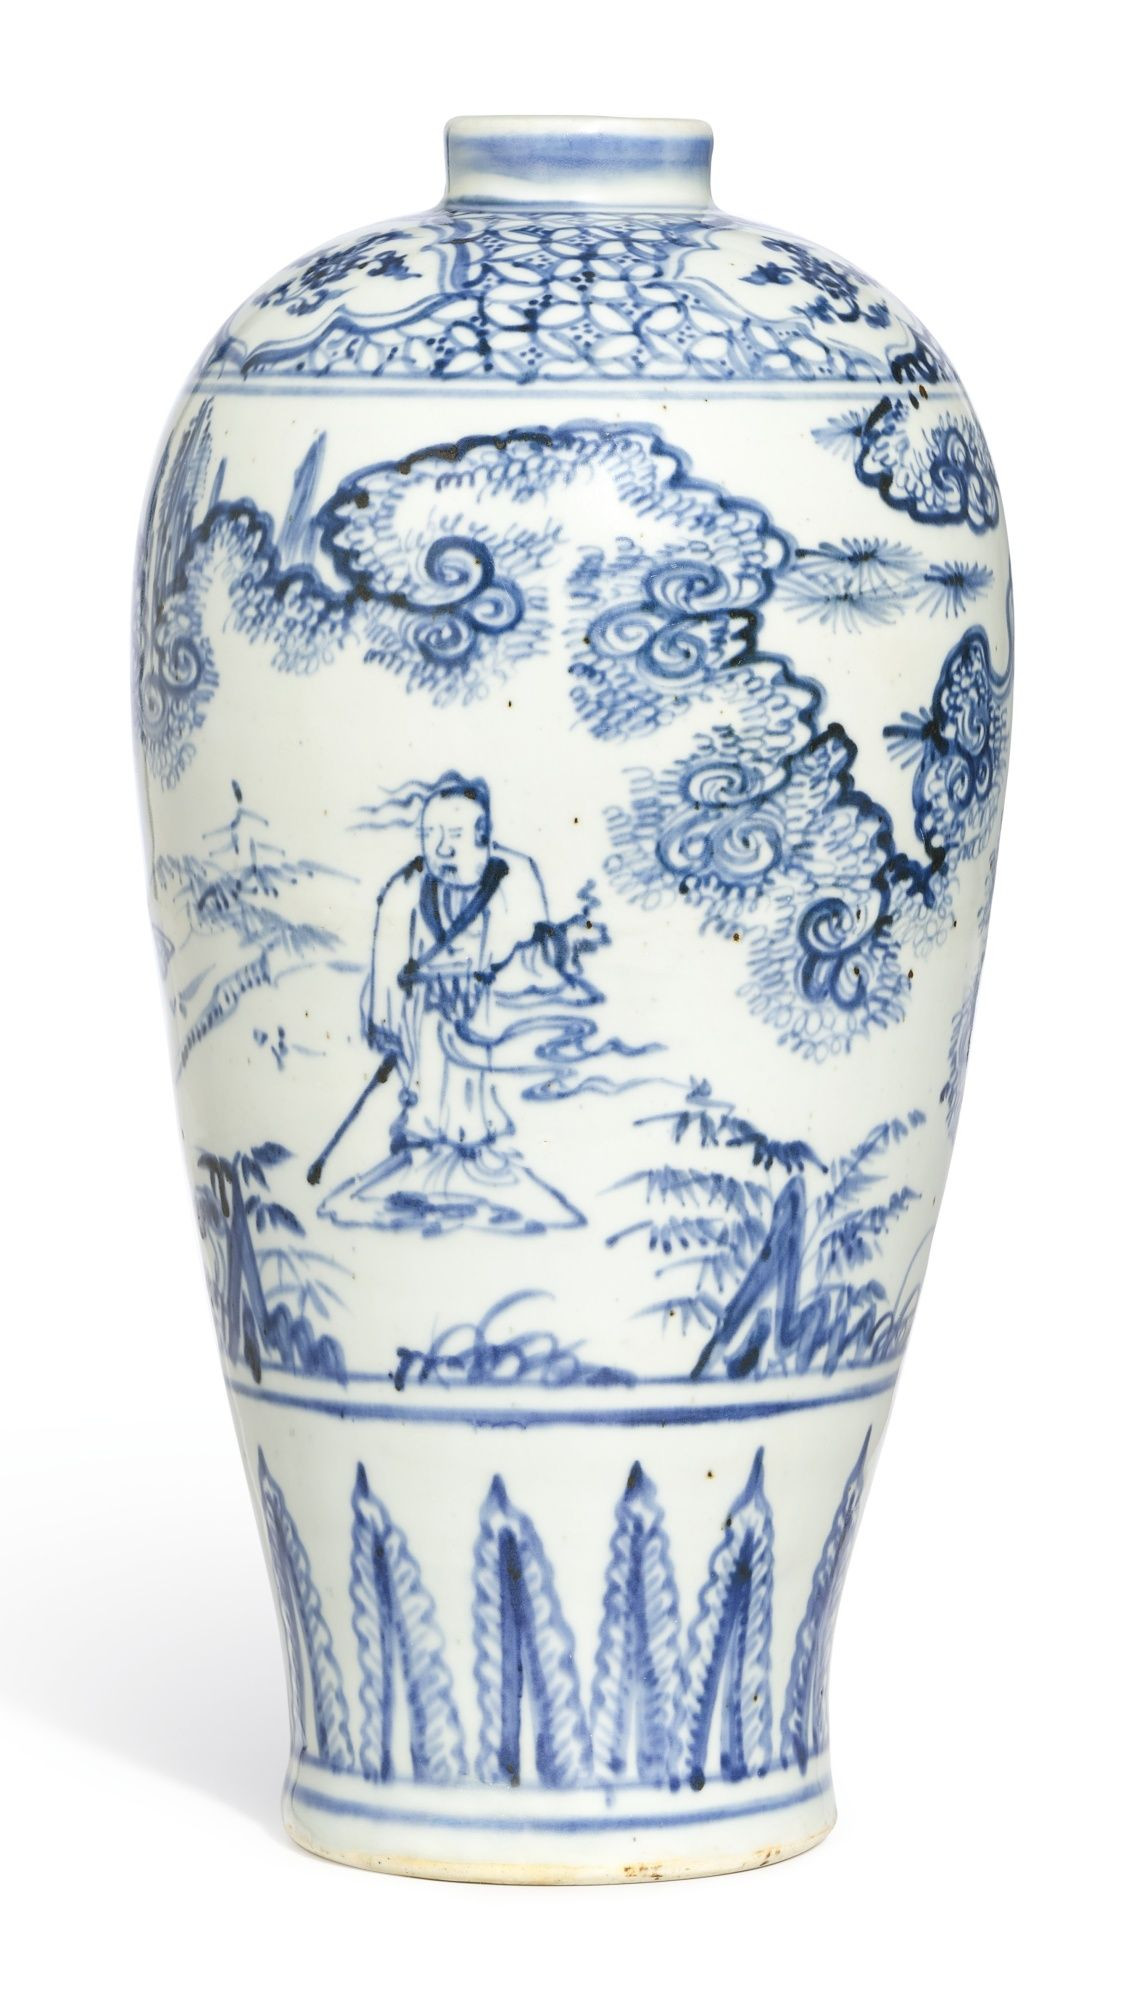 10 Trendy Blue and White Porcelain Vase 2024 free download blue and white porcelain vase of a blue and white figure meipingming dynasty 15th century with vase a blue and white